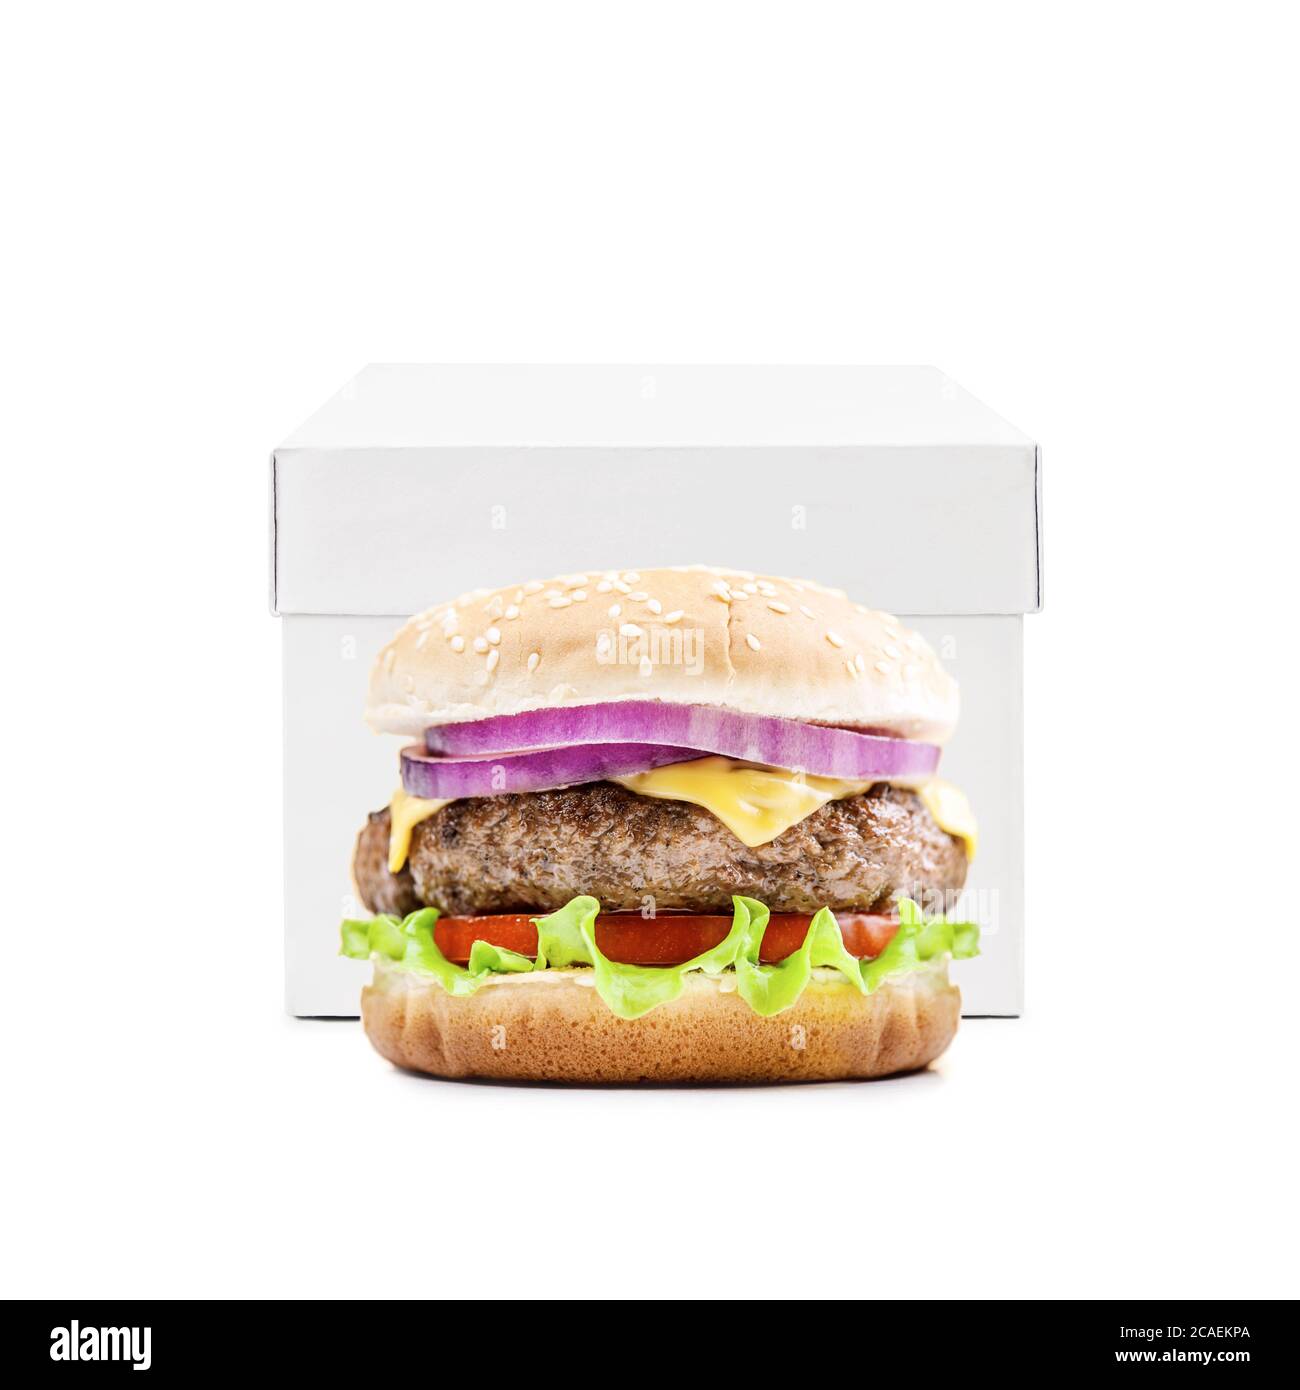 Hamburger cheeseburger burger and white box isolated on white background. Food delivery concept Stock Photo